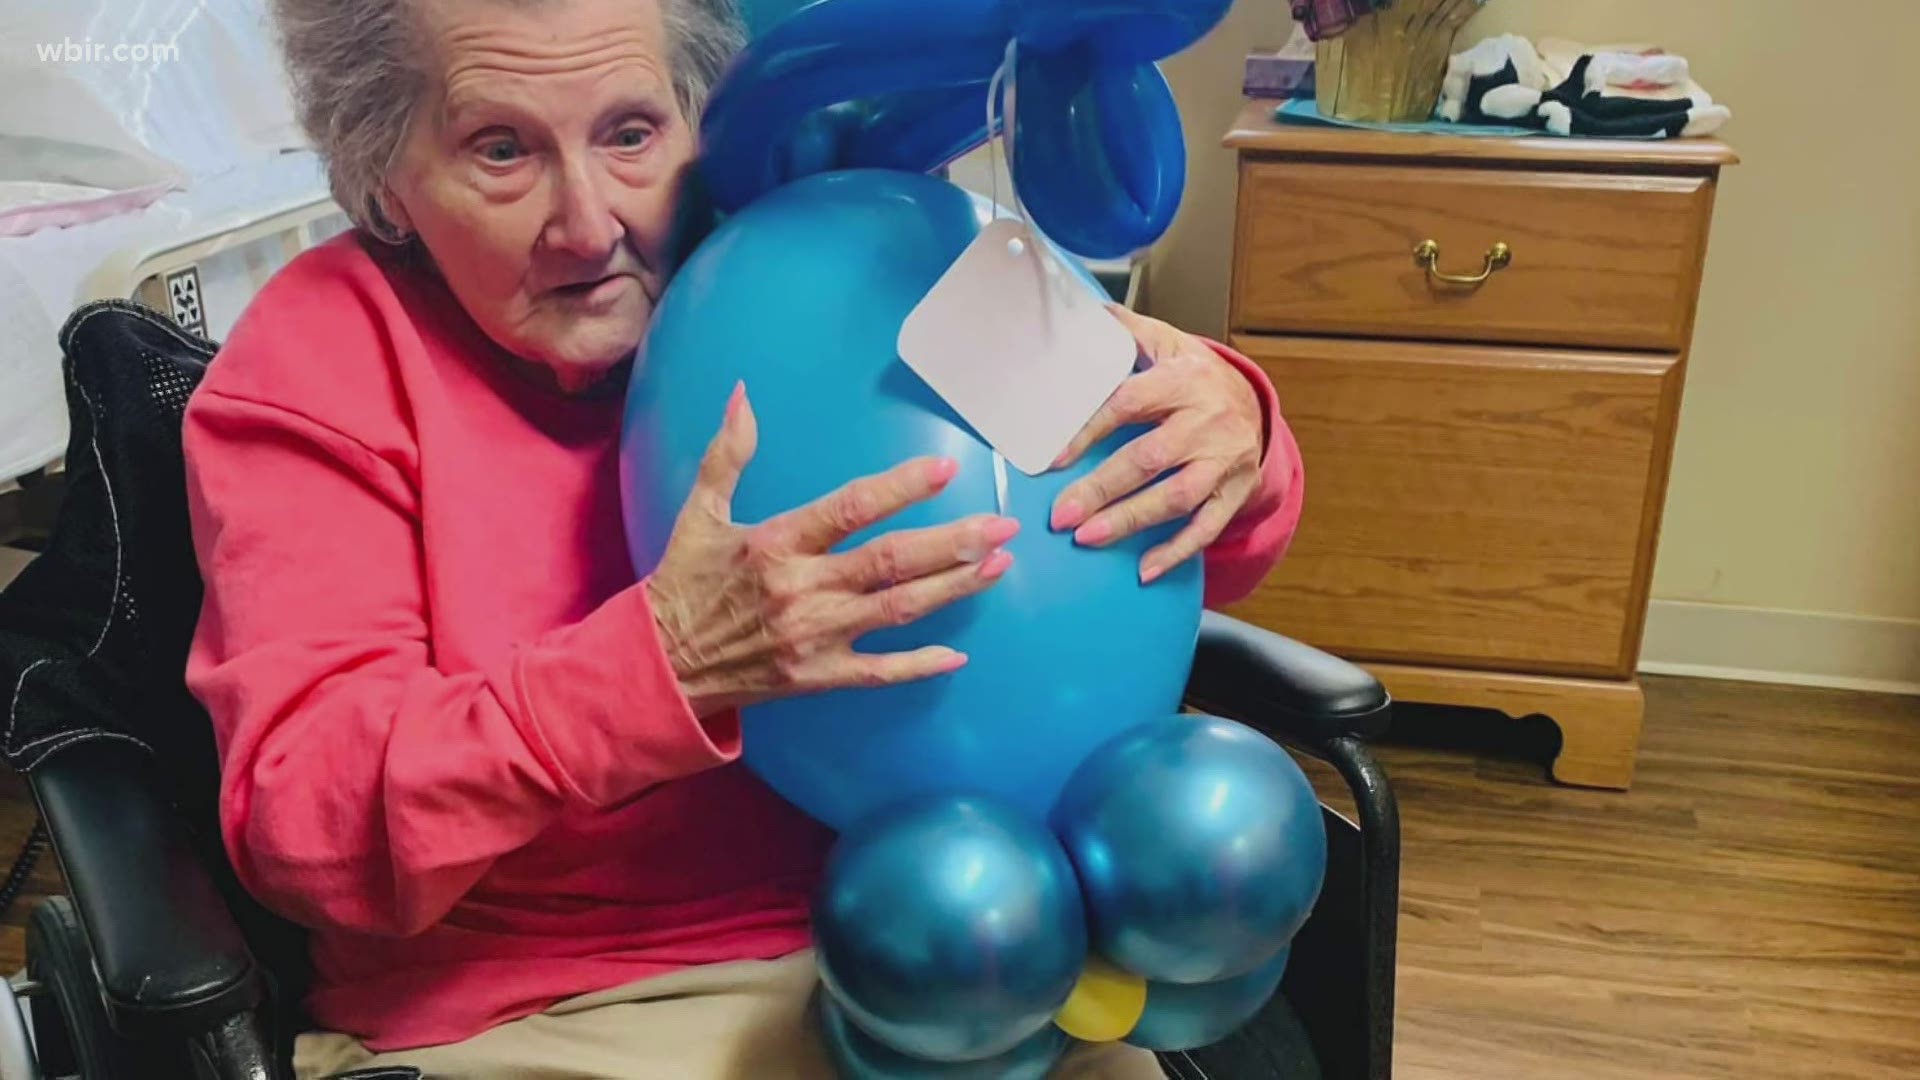 A local balloon artist is part of a nationwide initiative that is determined to bring smiles to senior citizens who have been isolated for months due to COVID-19.